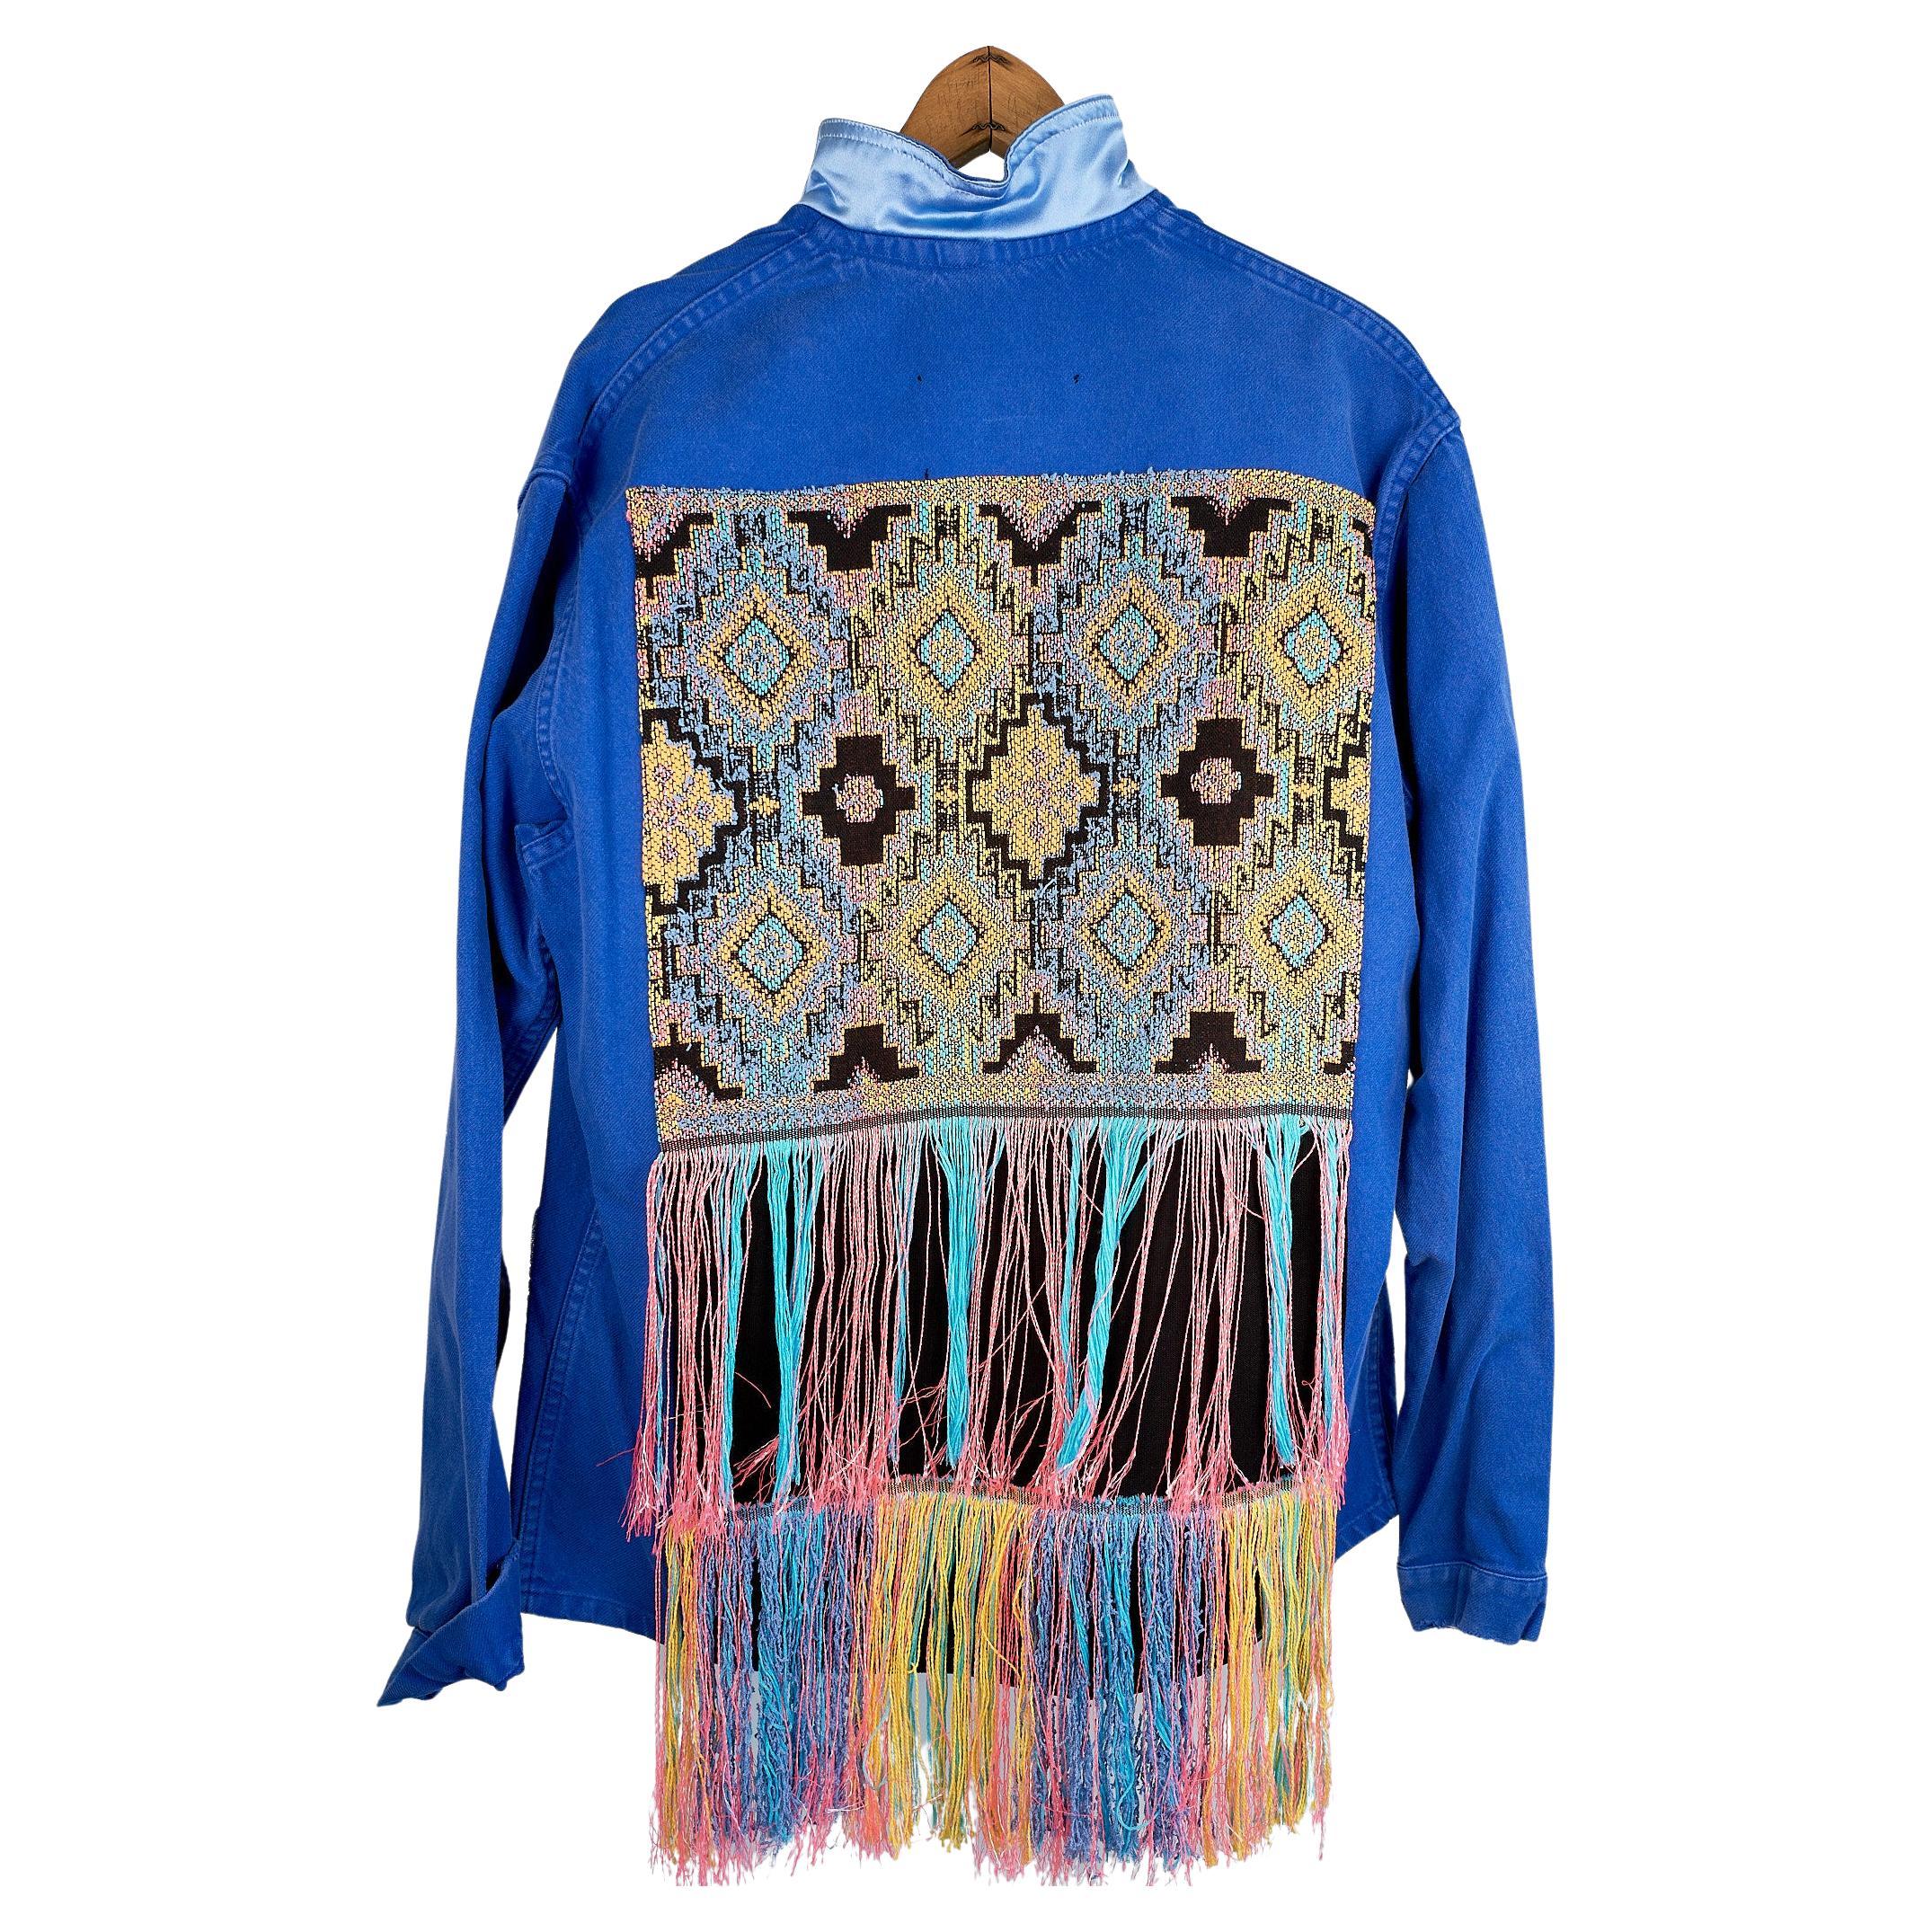 Multi Color Pattern Fringes Embellished Repurposed Cobalt Blue Jacket French Work Wear with a Light Blue Silk Collar and Light Blue Glitter

Brand: J Dauphin
Size: Large
100% Sustainable Luxury, Up-cycled and Re-purposed Collectible Vintage

Our